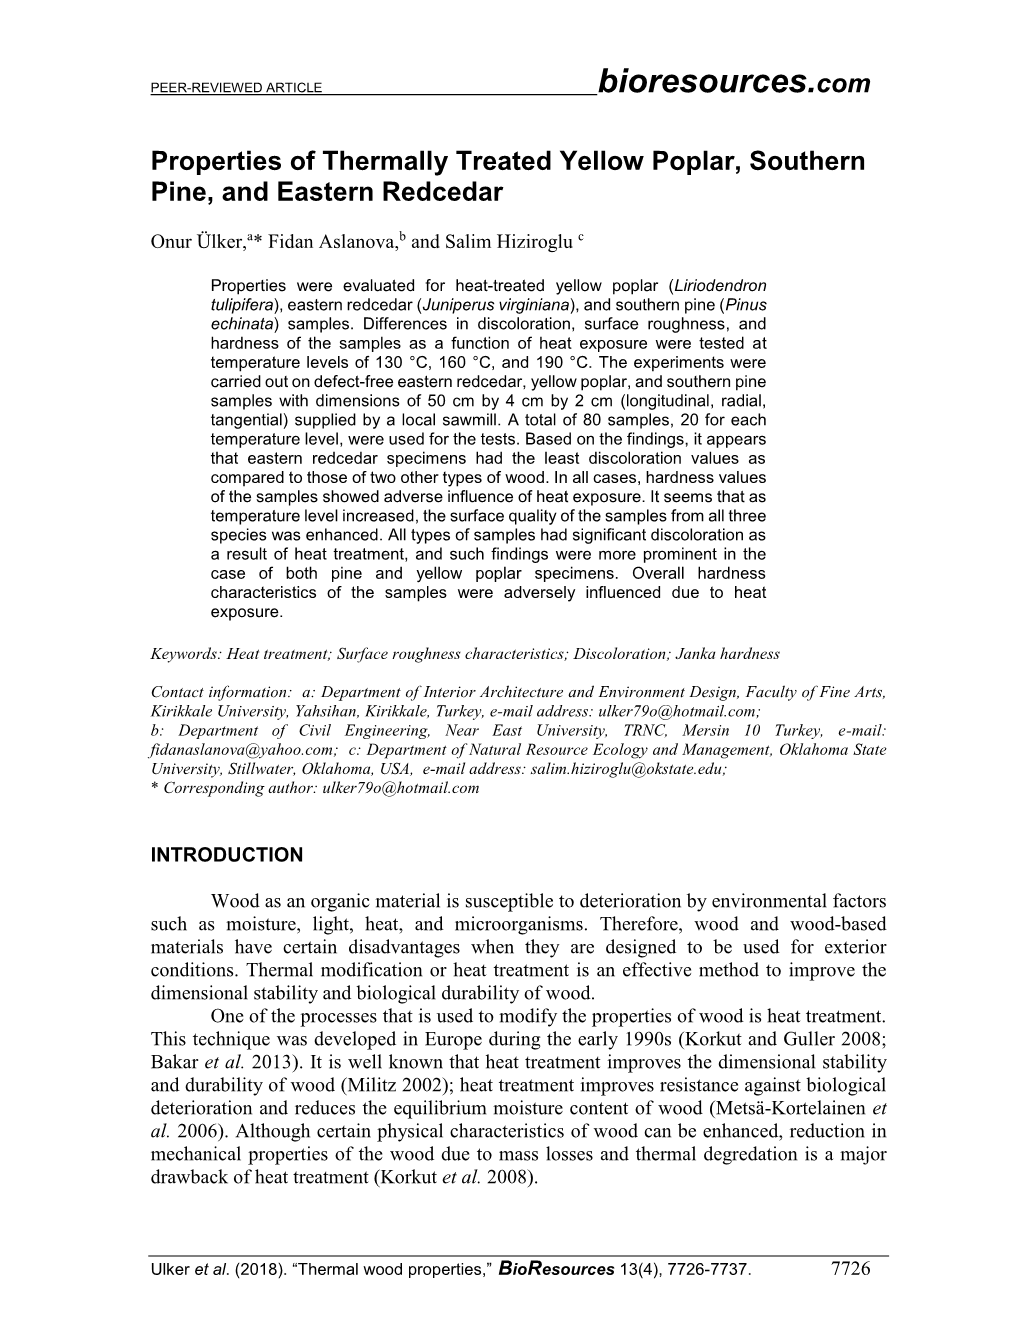 Properties of Thermally Treated Yellow Poplar, Southern Pine, and Eastern Redcedar